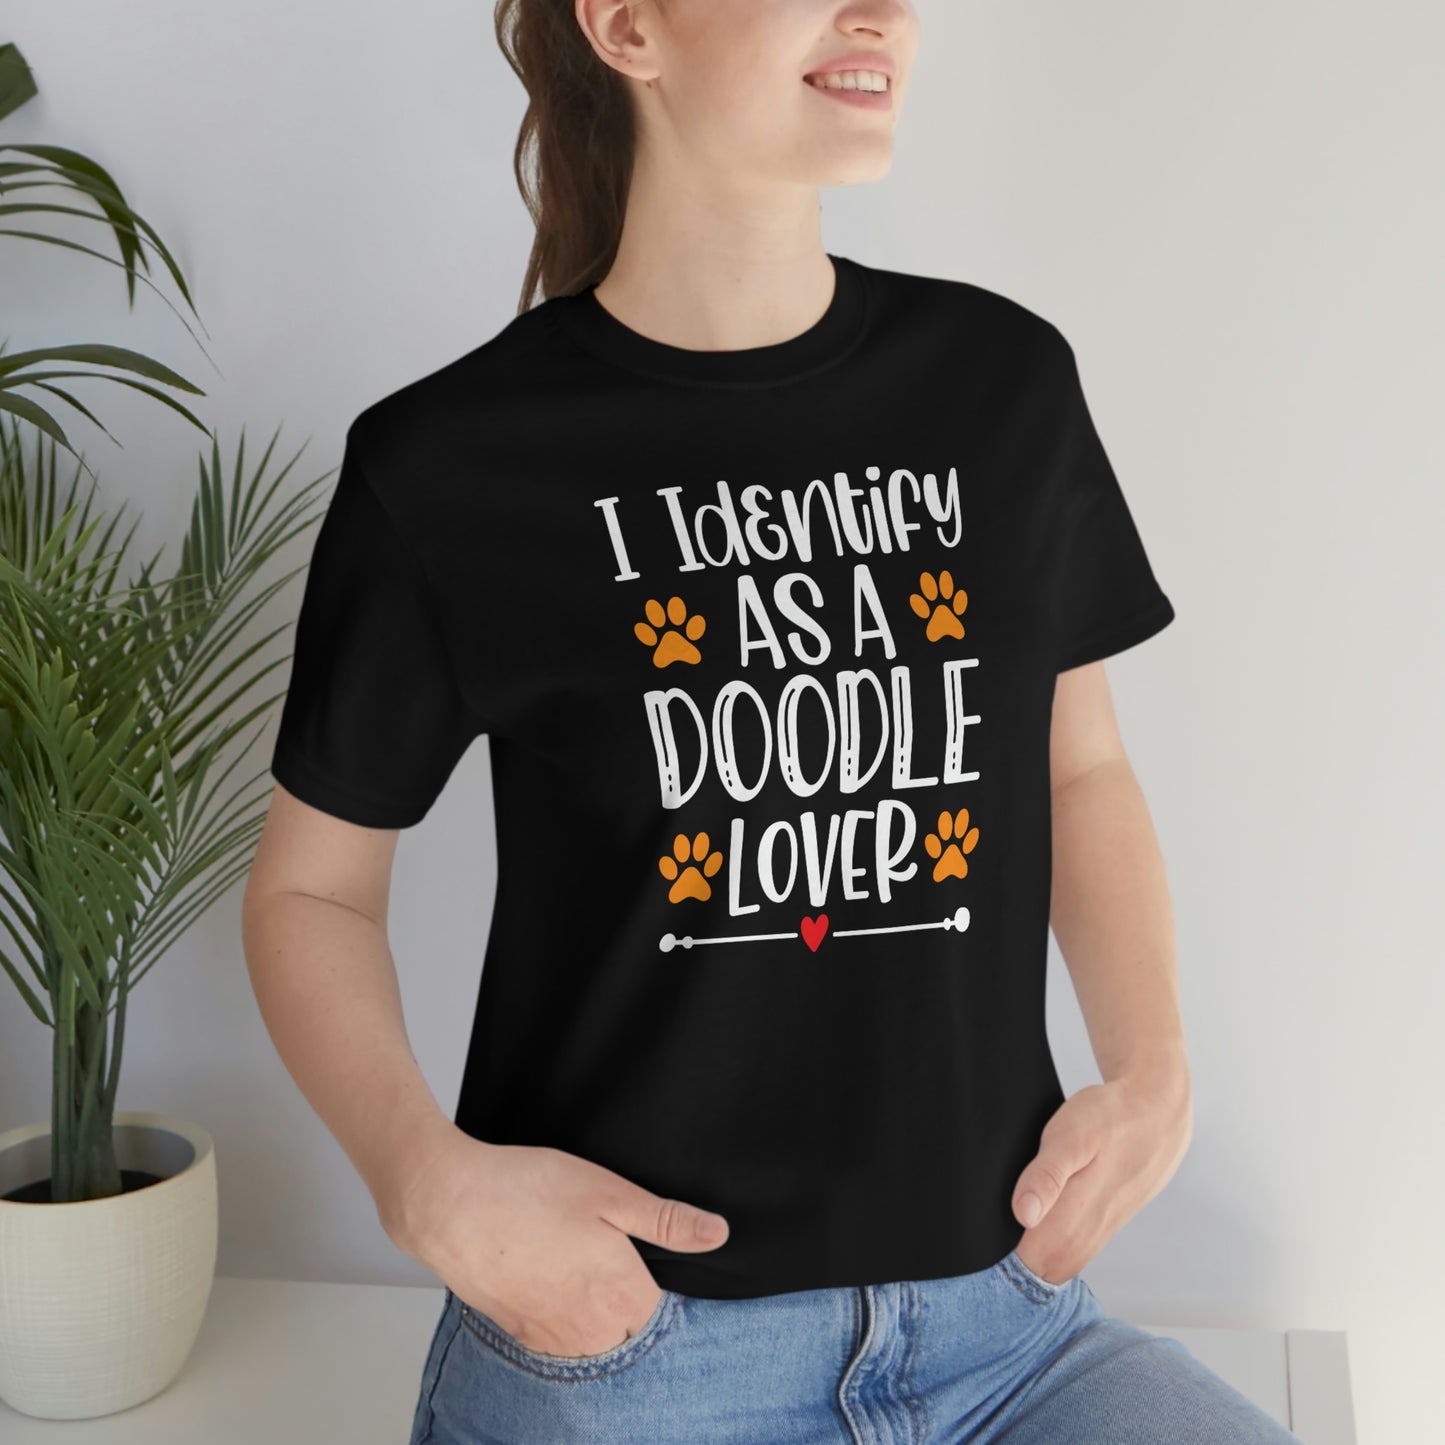 I Identify as a Doodle Lover T-shirt